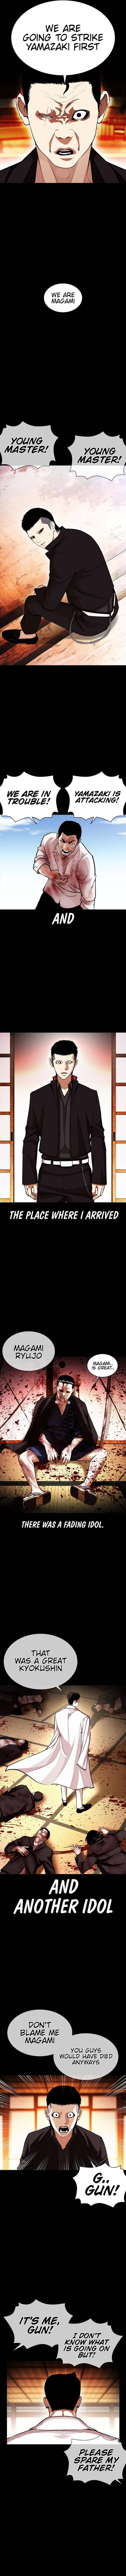 Lookism, Ch. 385 - Chapter 385 image 09